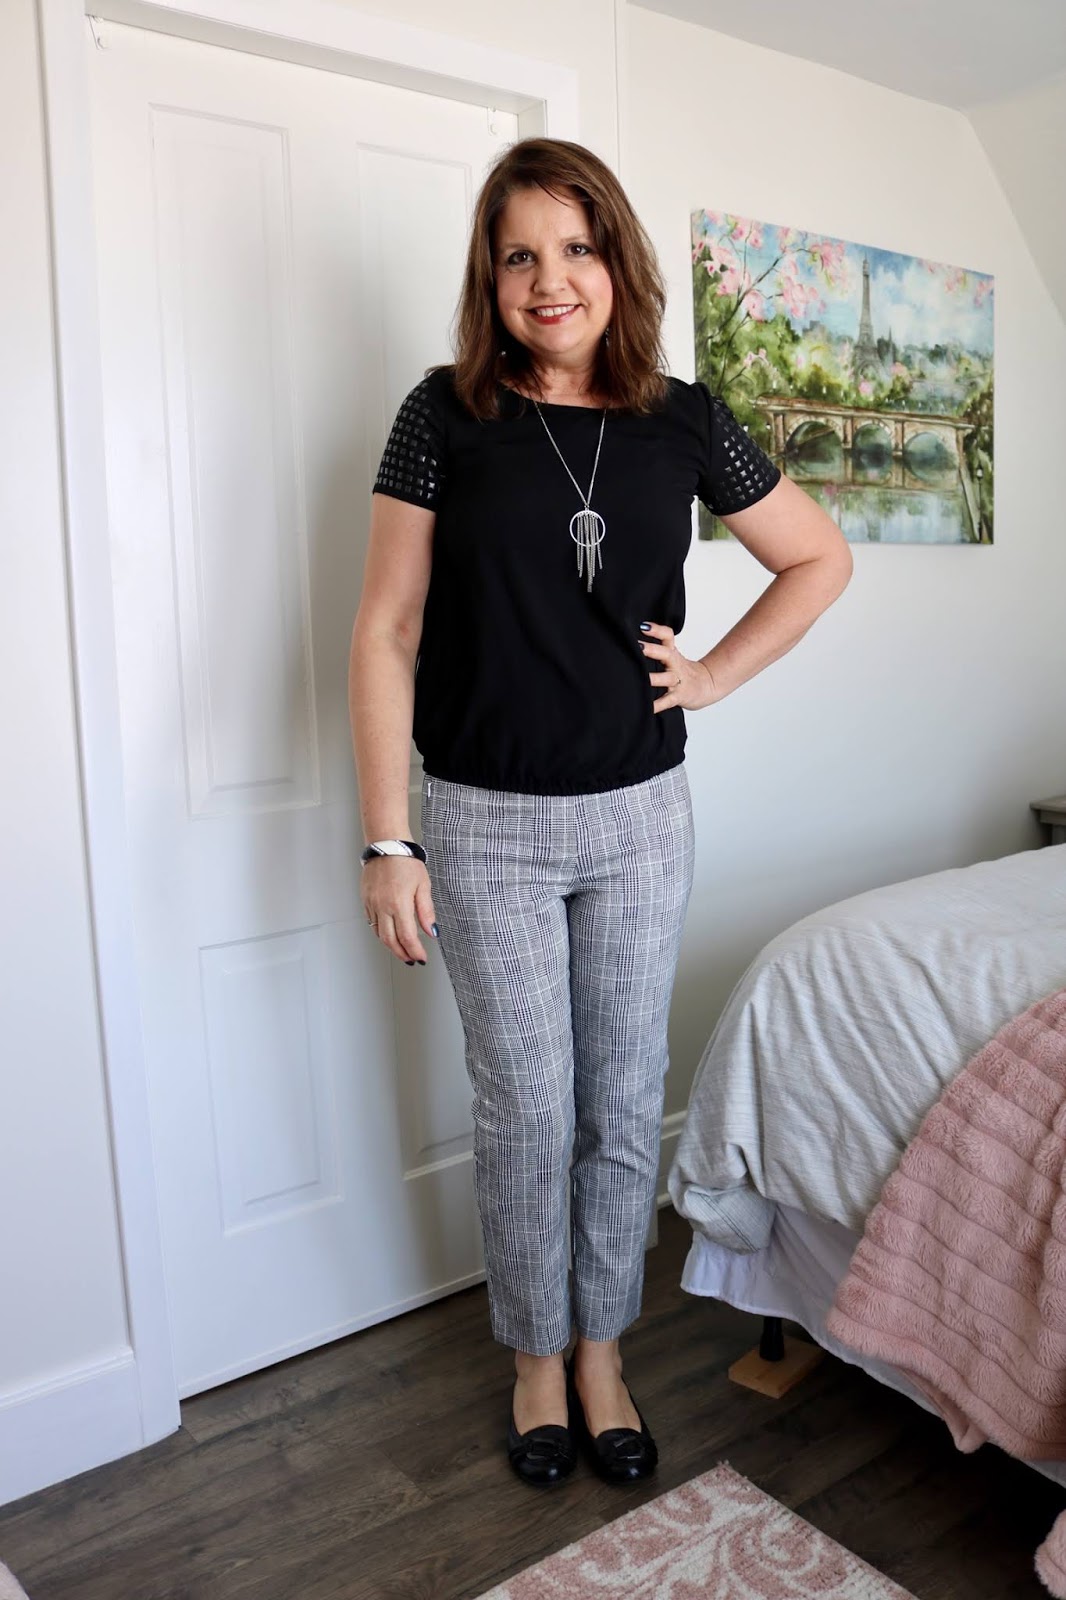 Amy's Creative Pursuits: How To Wear Printed Pants